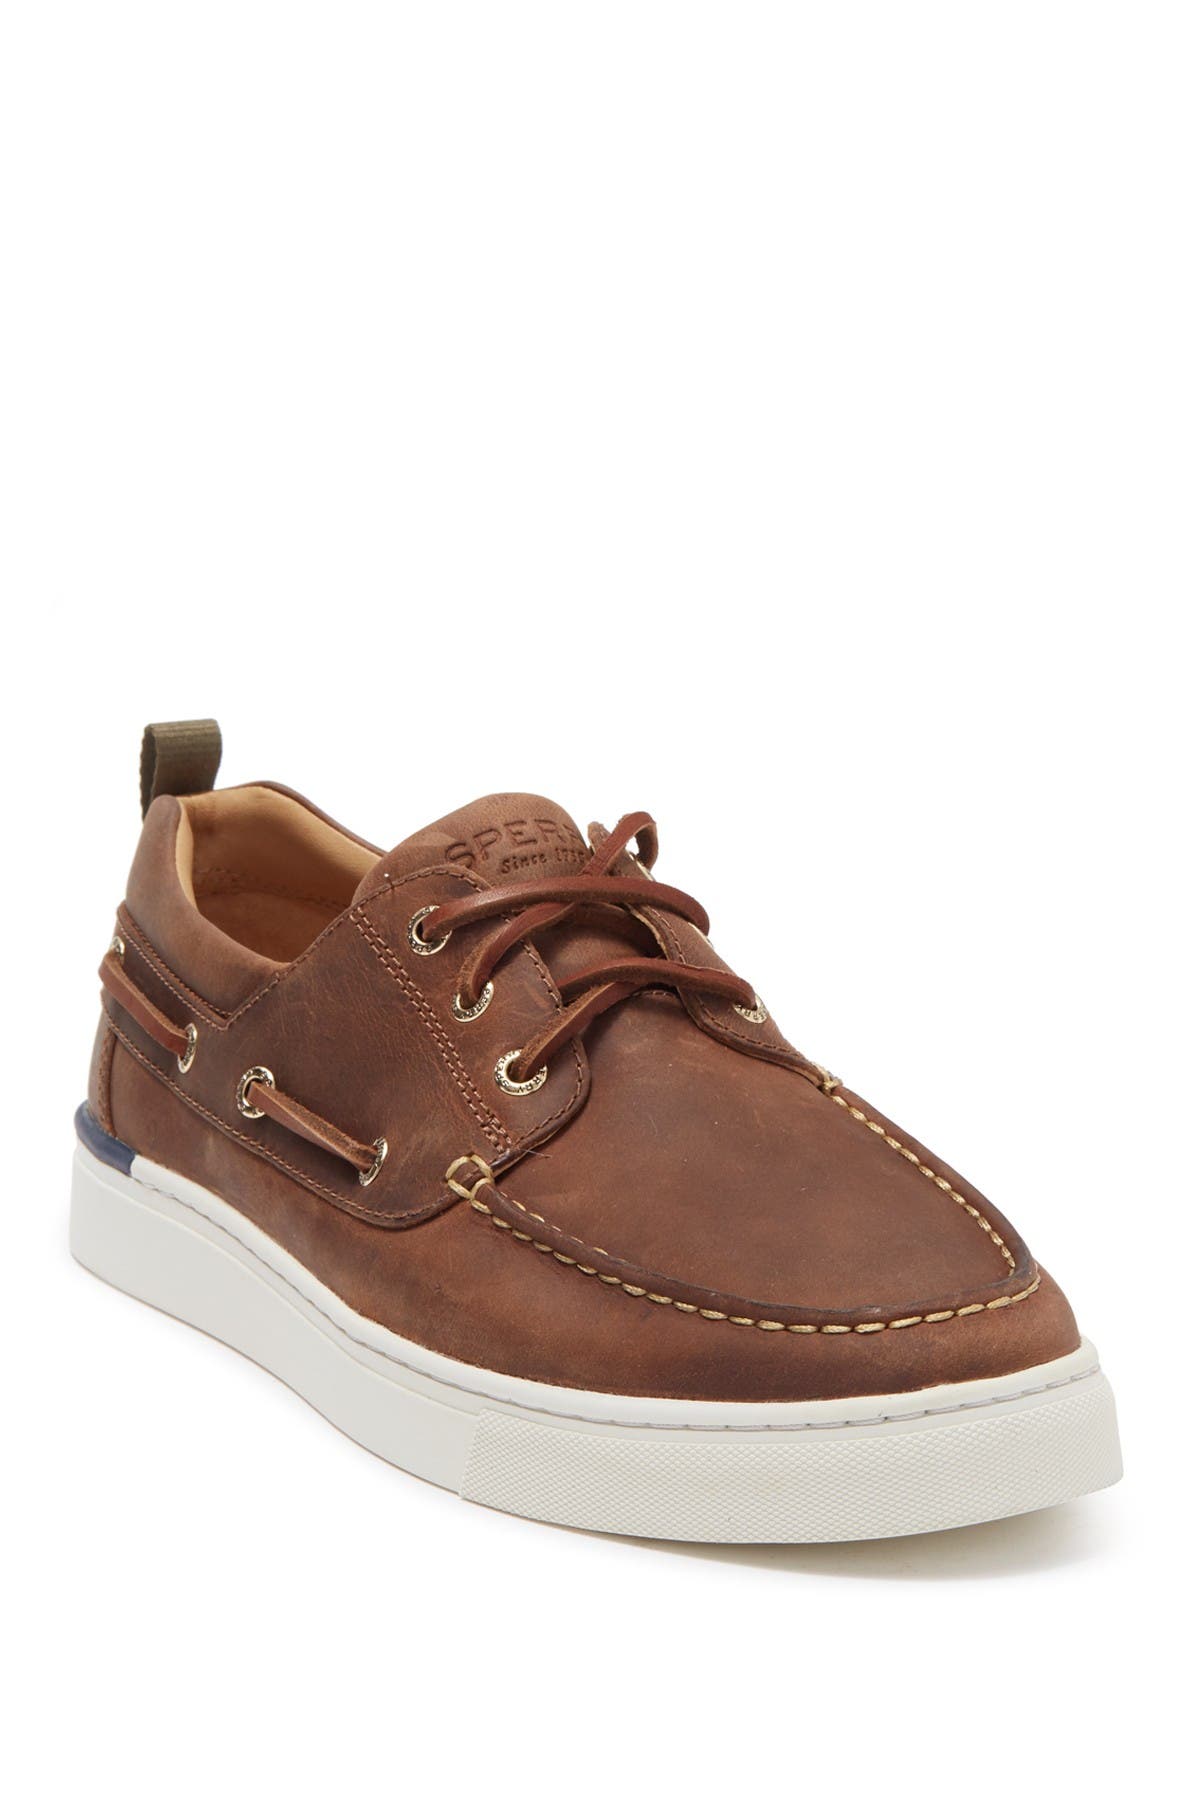 where to buy boat shoes near me